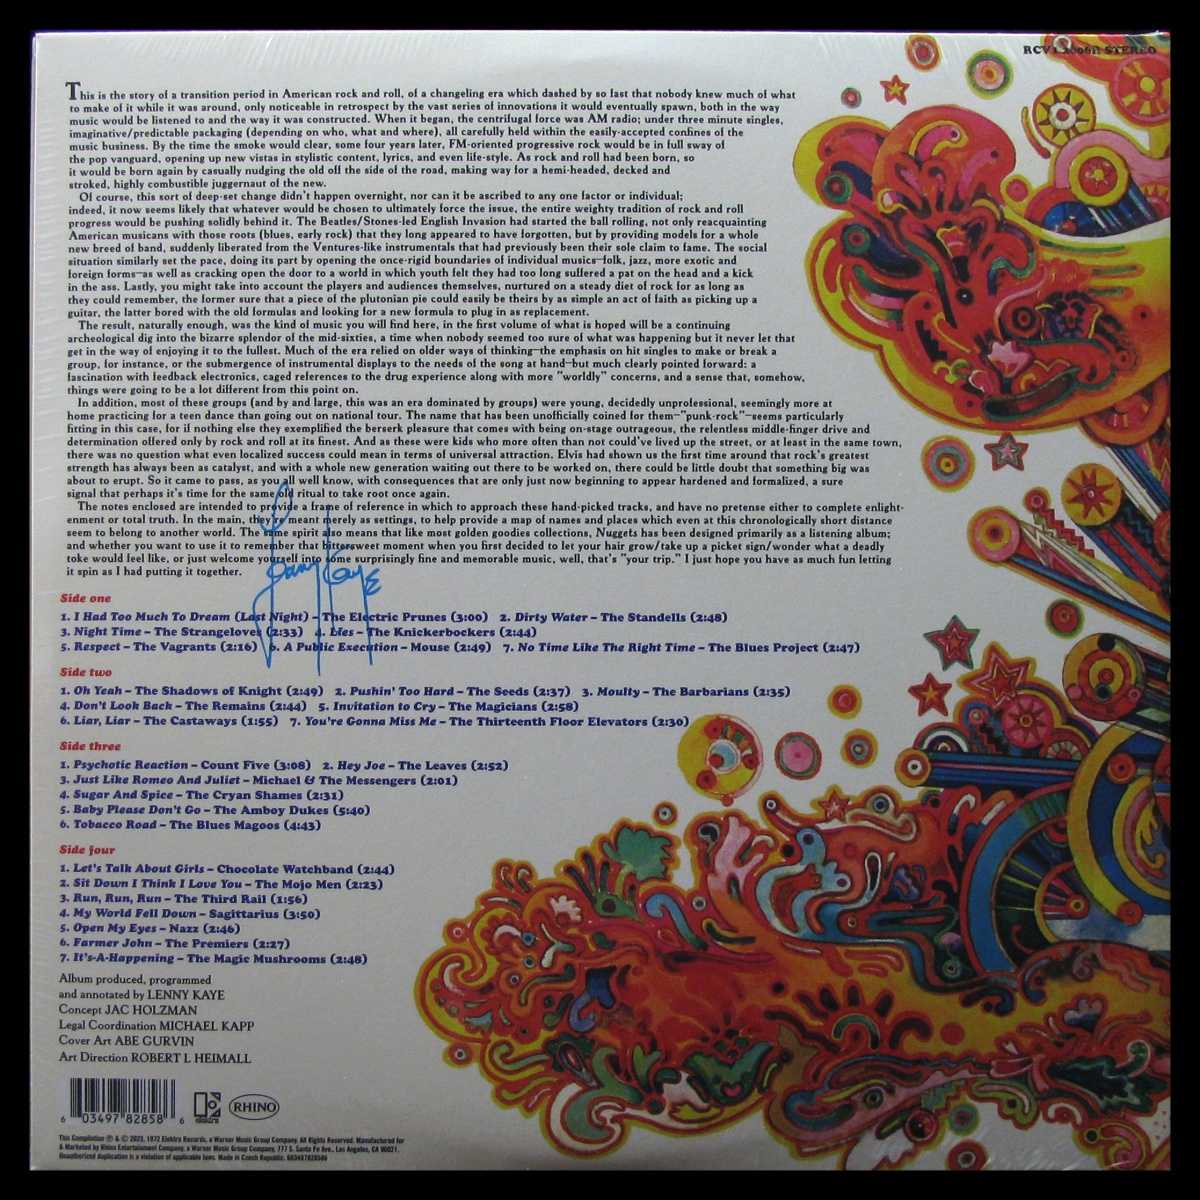 LP V/A — Nuggets: Original Artyfacts From The First Psychedelic Era 1965-1968 (2LP, coloured vinyl) фото 2